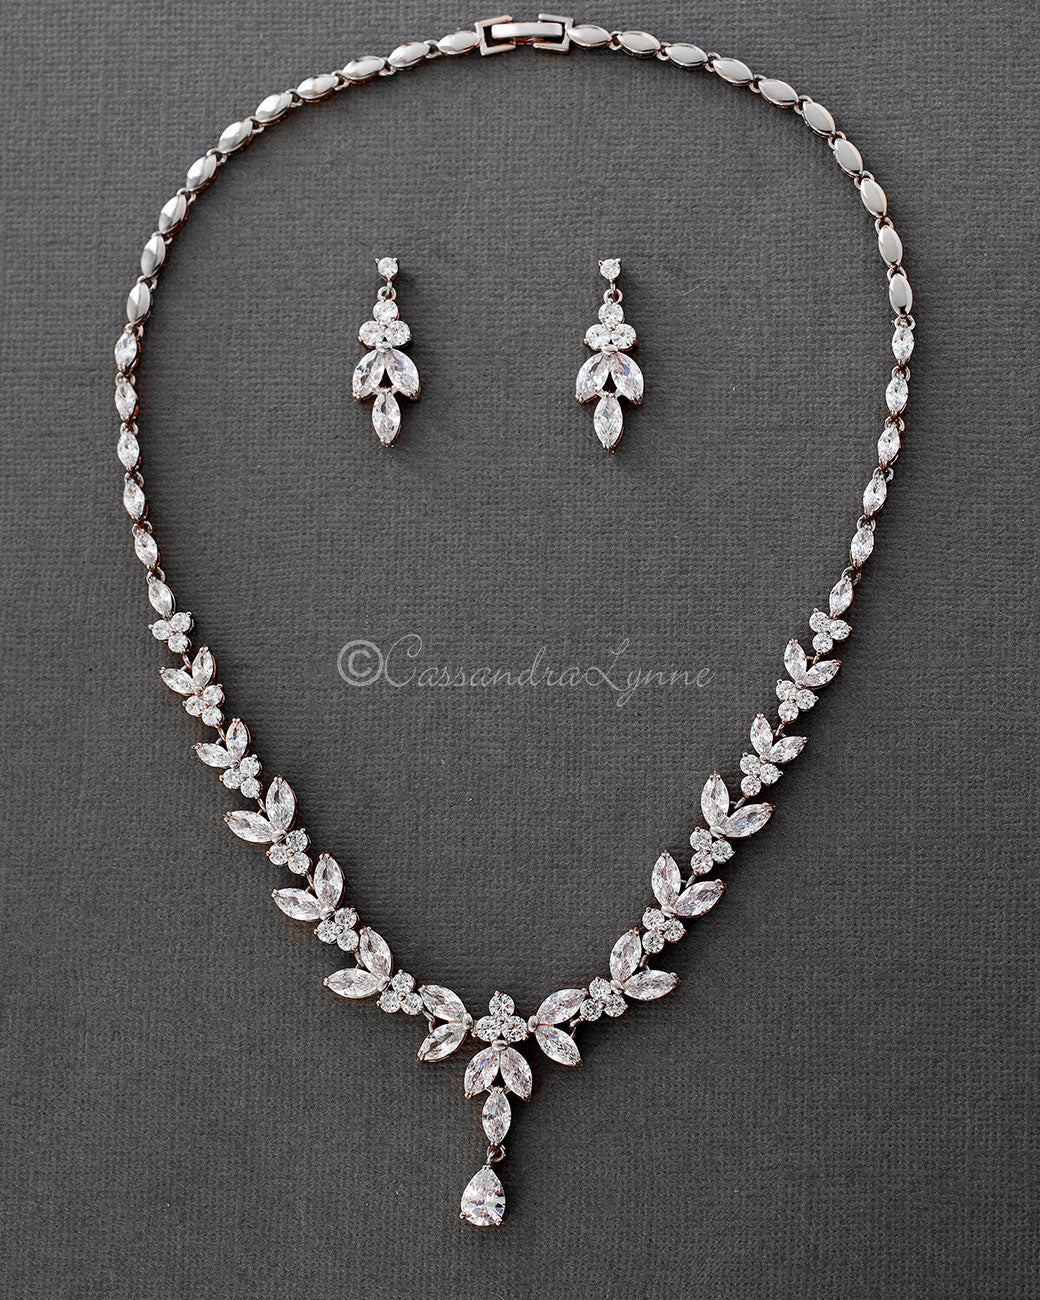 Marquise Leaf Bridal Necklace and Earrings - Cassandra Lynne